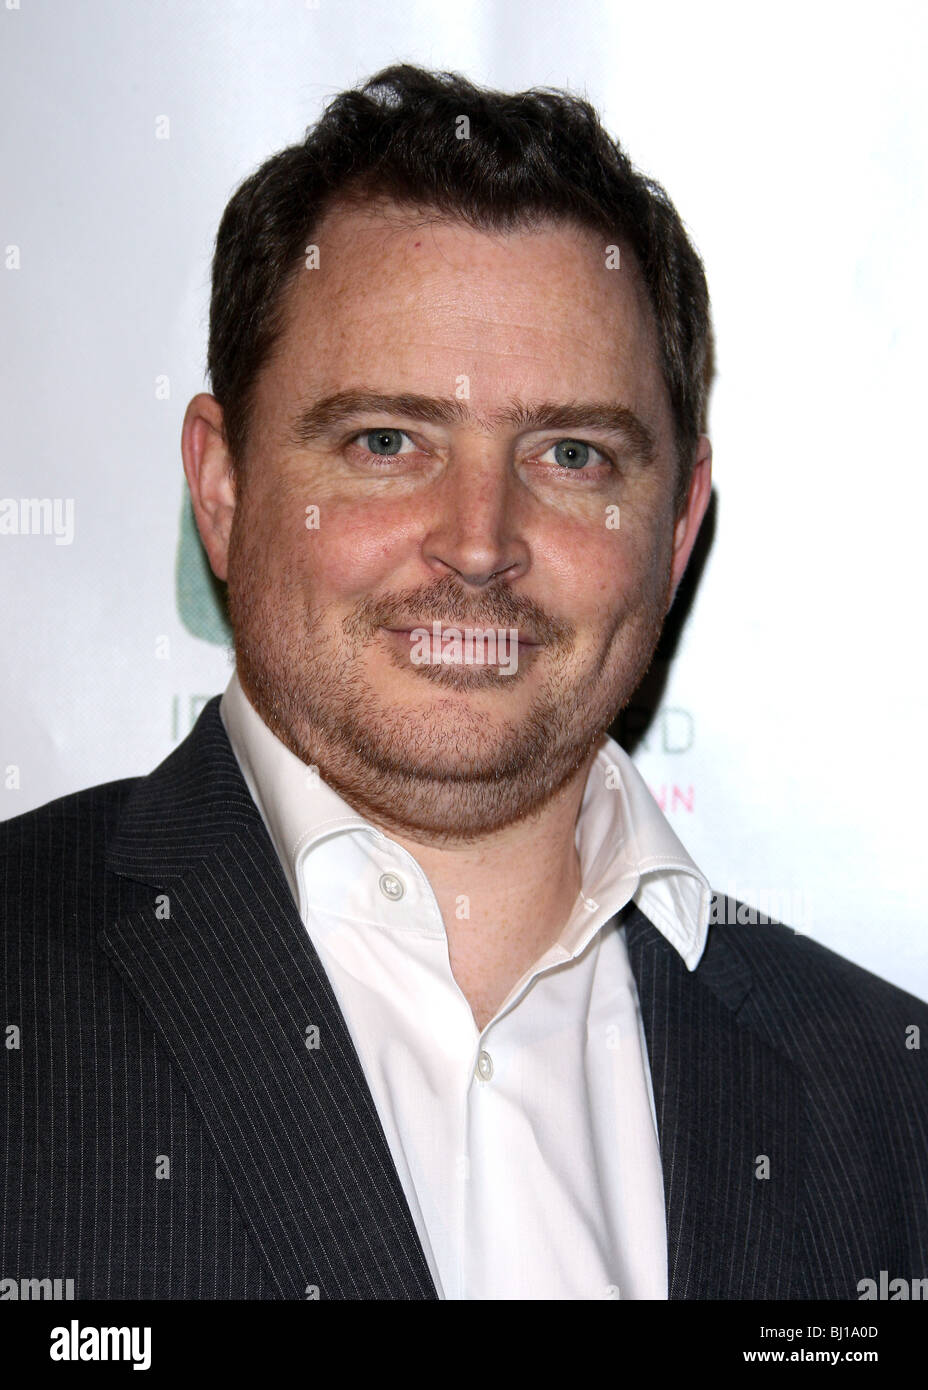 DARRAGH O'CONNELL US-IRELAND ALLIANCE PRE-ACADEMY AWARDS EVENT LOS ANGELES CA USA 04 March 2010 Stock Photo